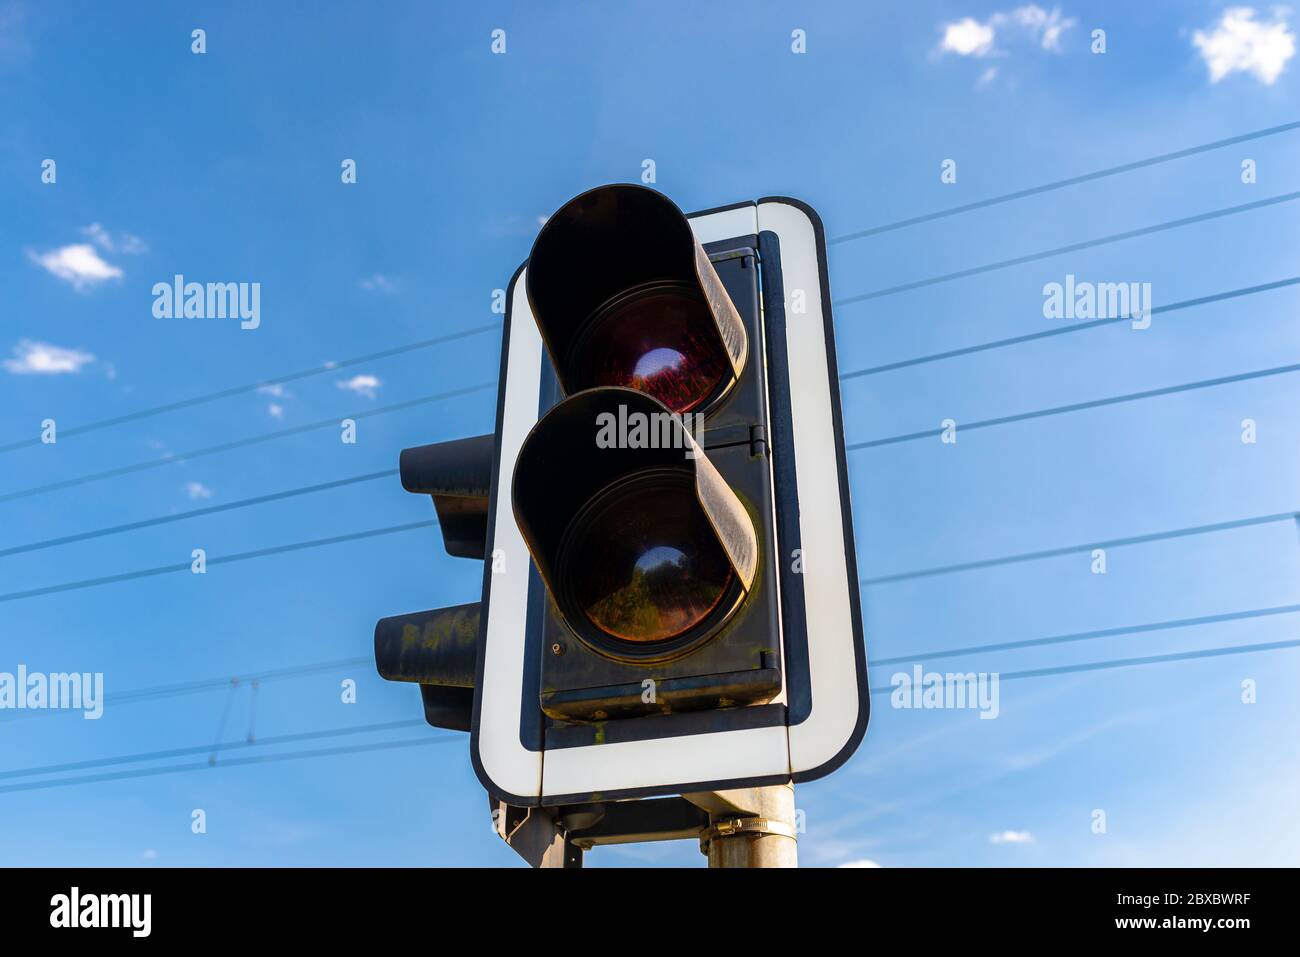 Traffic lights before the railway crossing with a red light to warn of approaching trains. Stock Photo